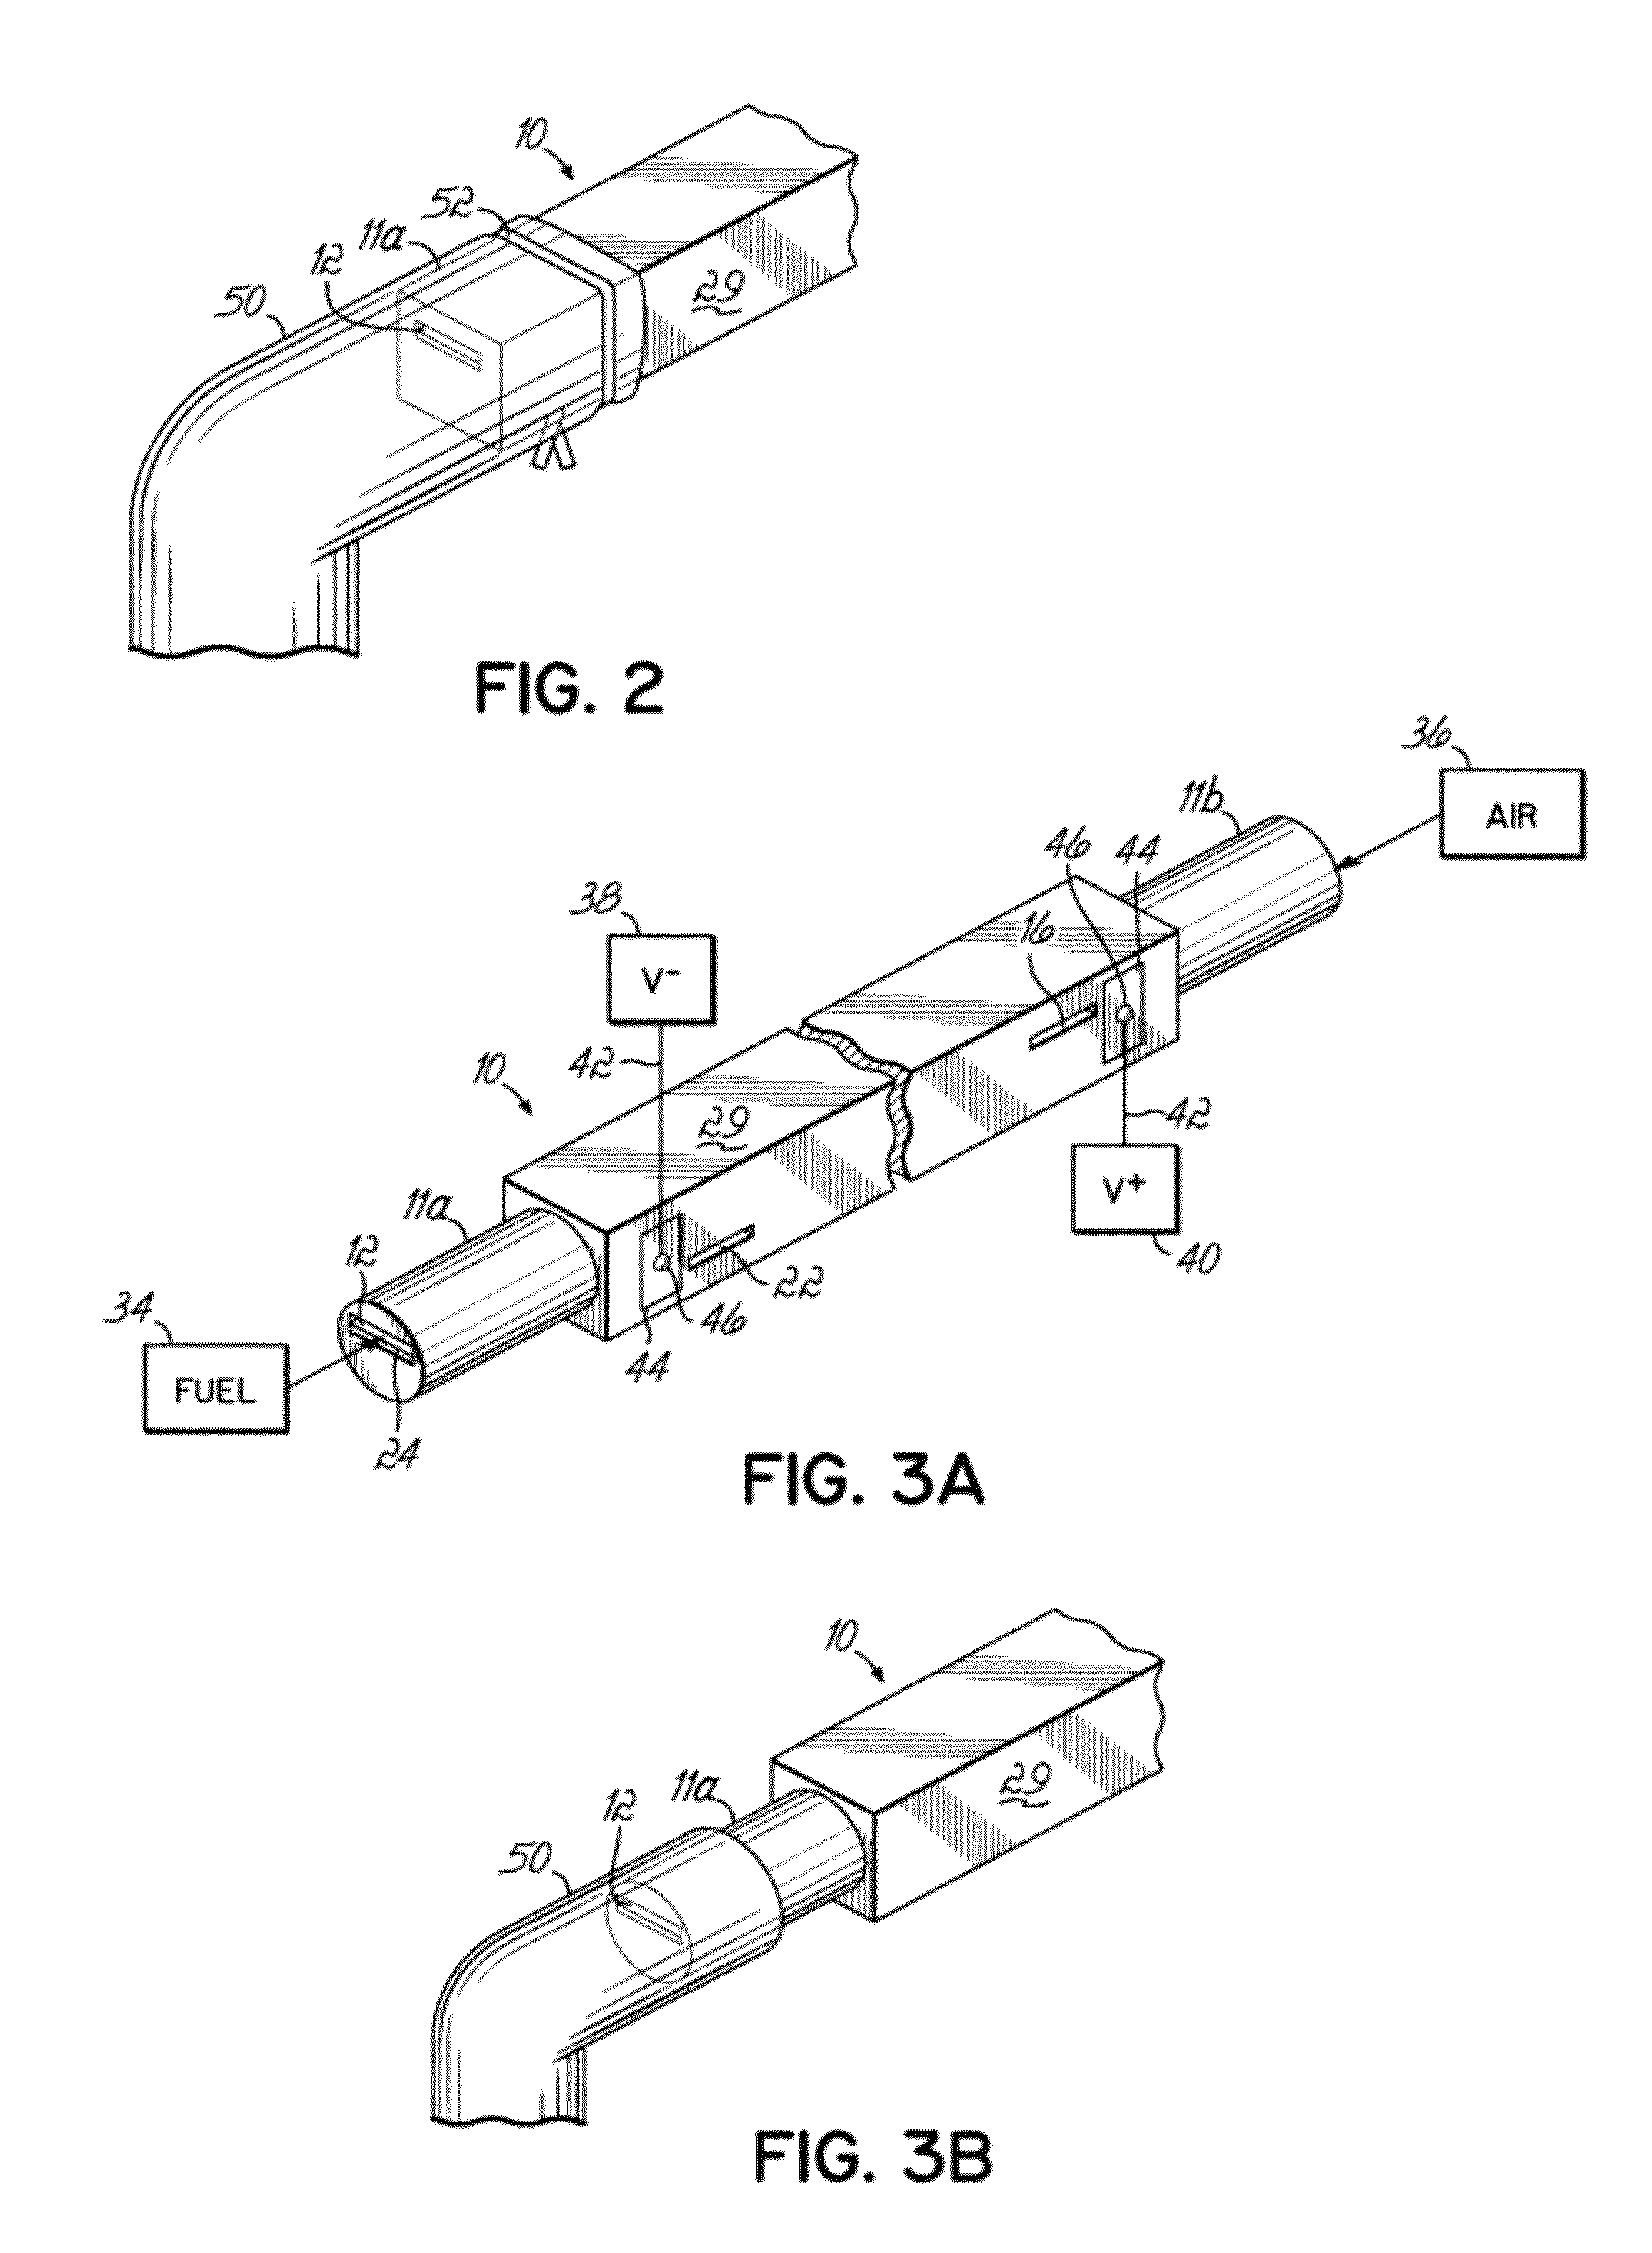 Method of making a fuel cell device